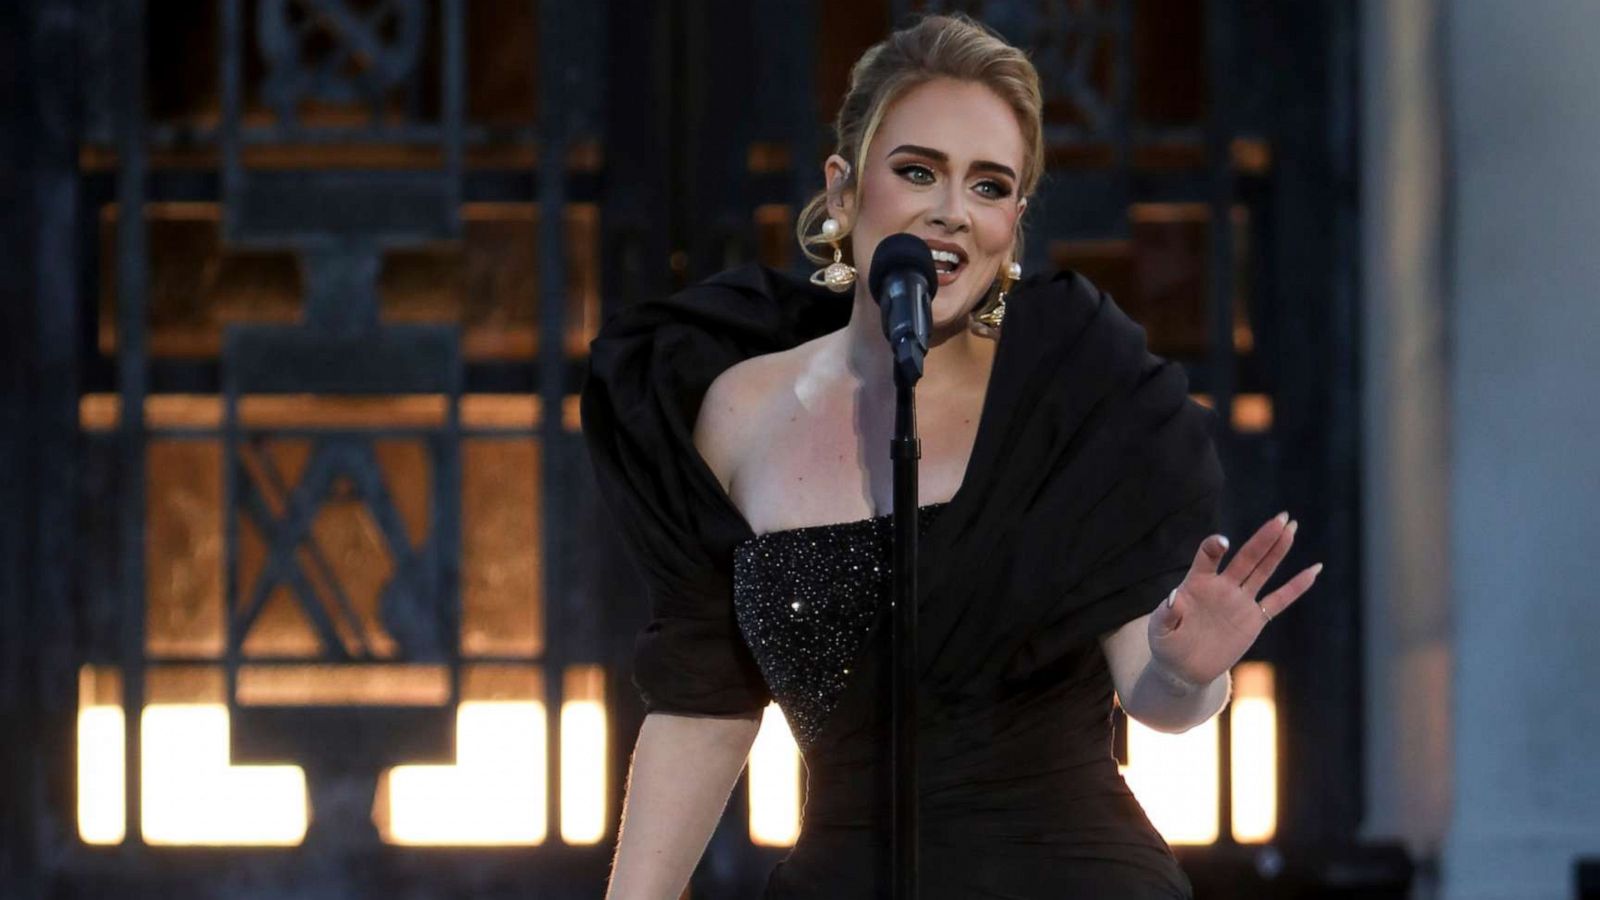 Adele Wore Givenchy For Her 'Weekends with Adele' Las Vegas Residency